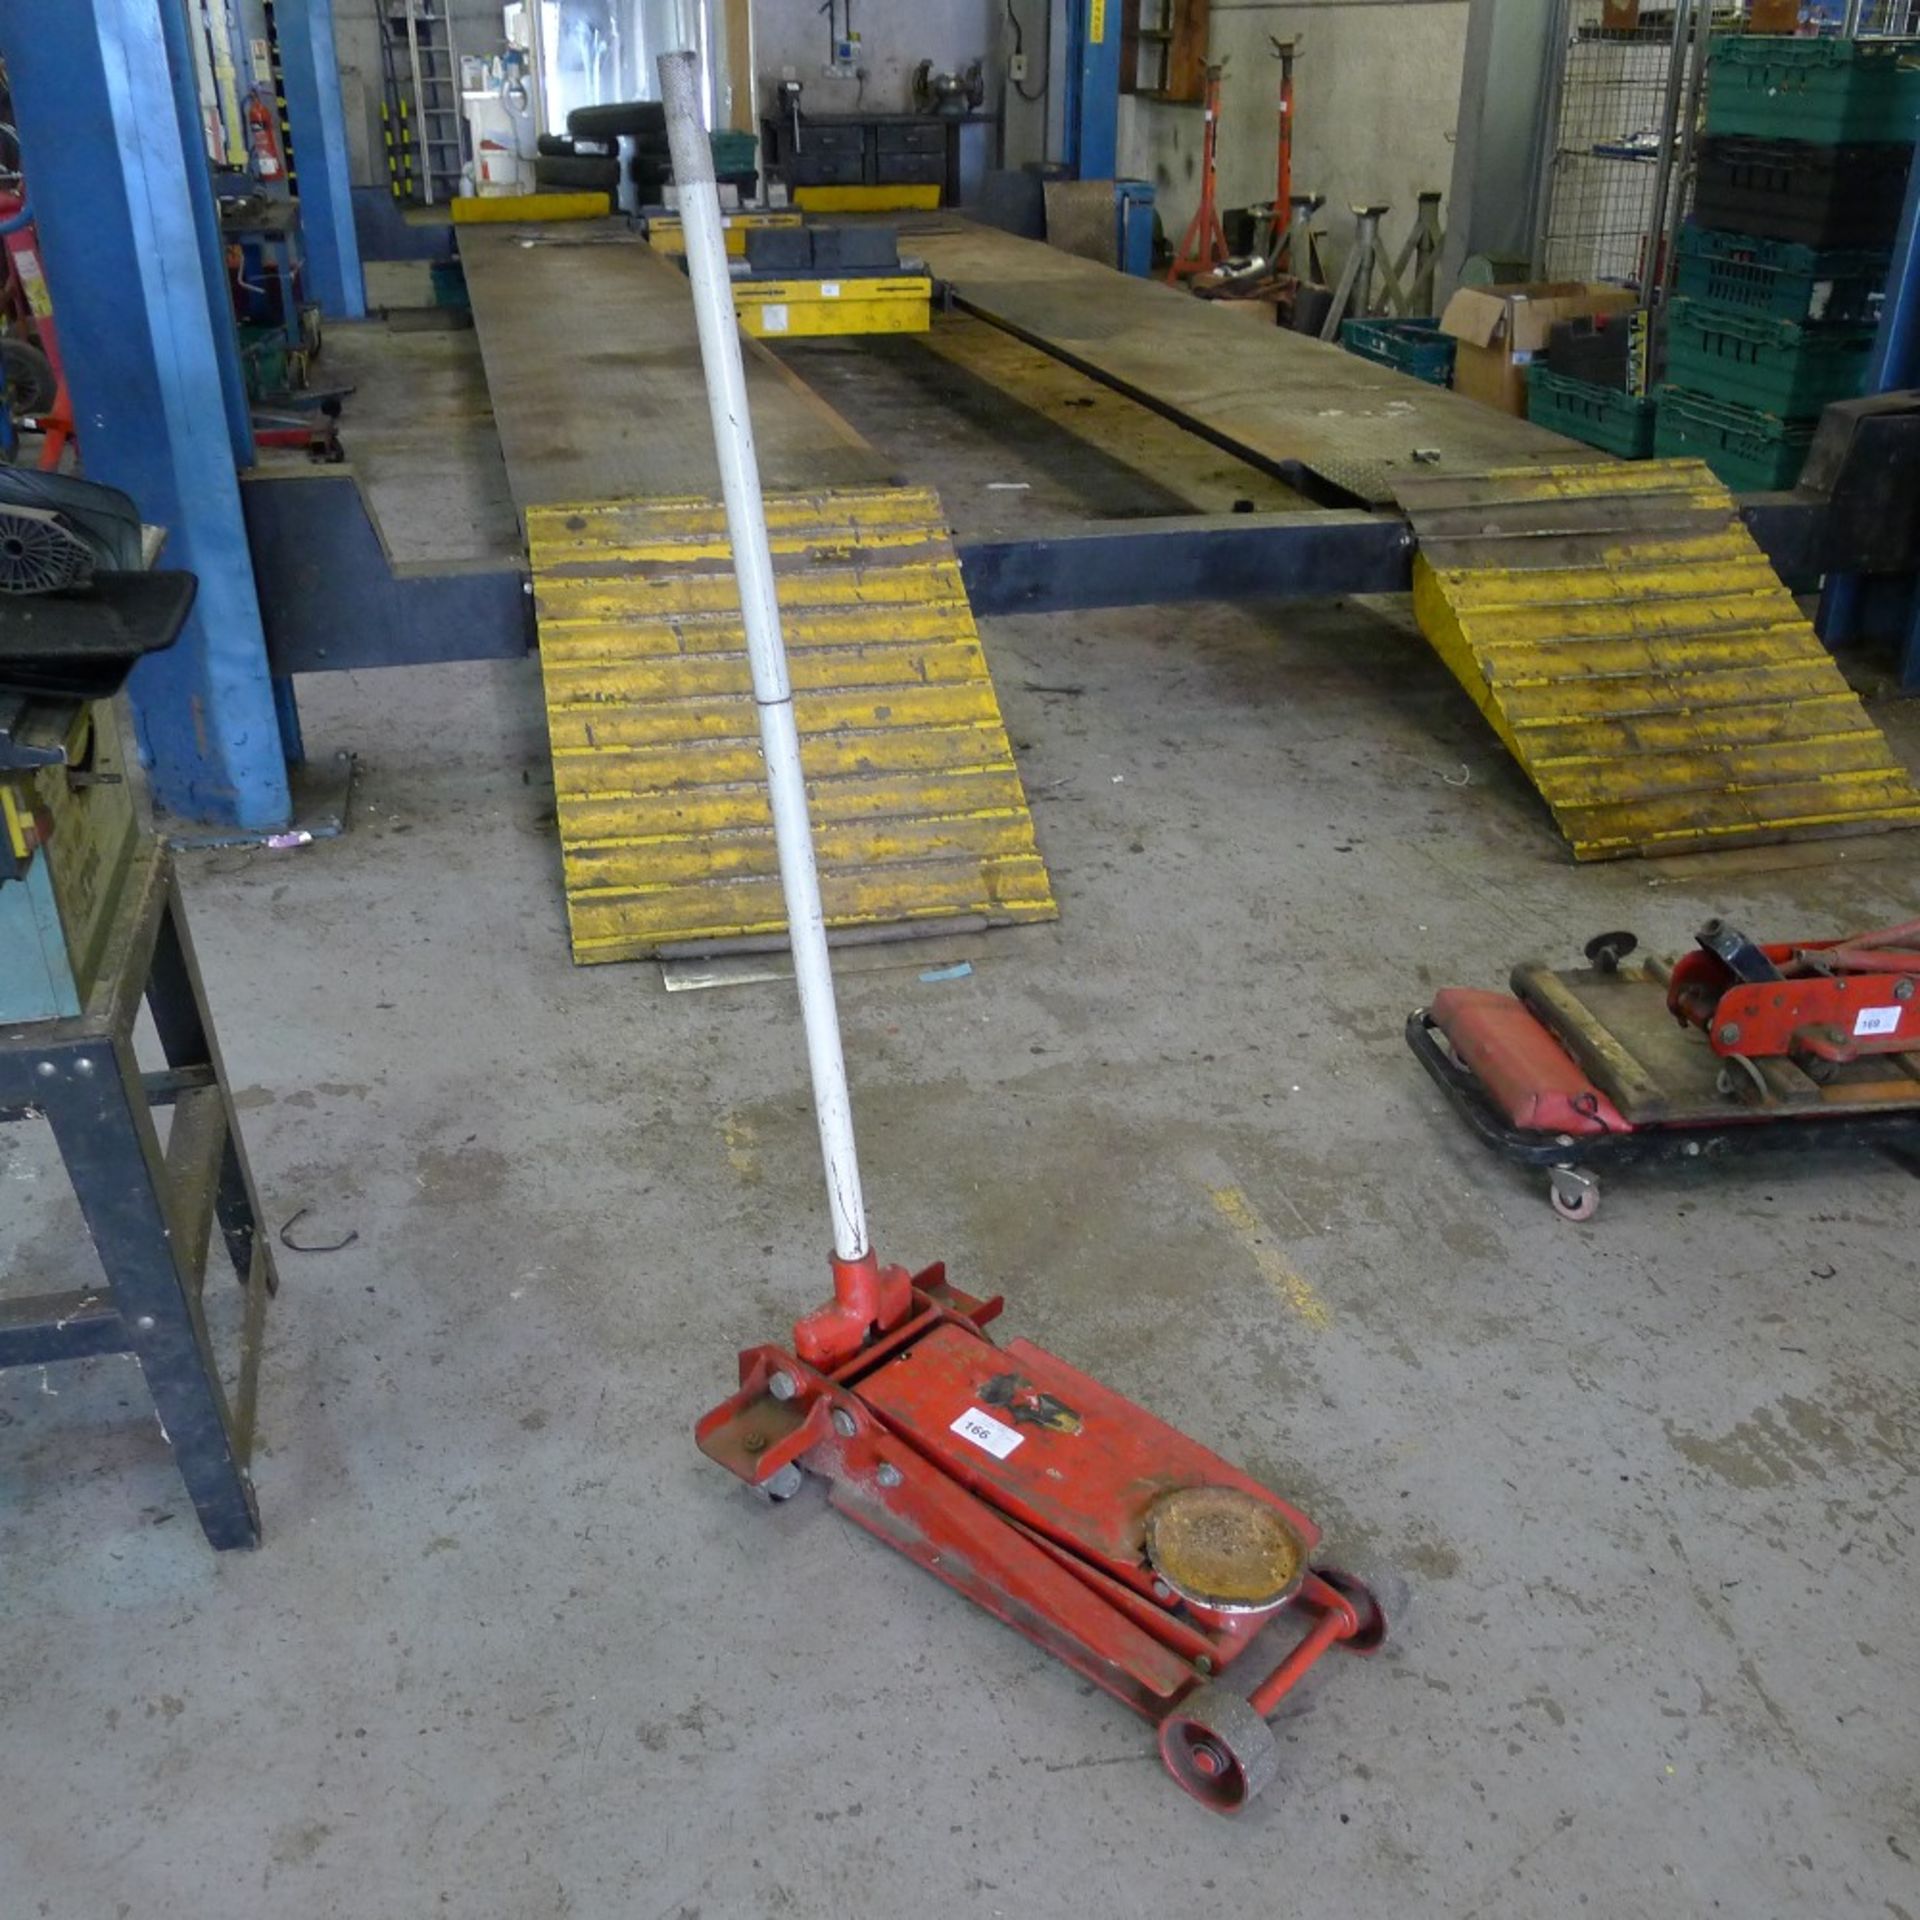 1 trolley jack believed to be 3 ton capacity – no make visible